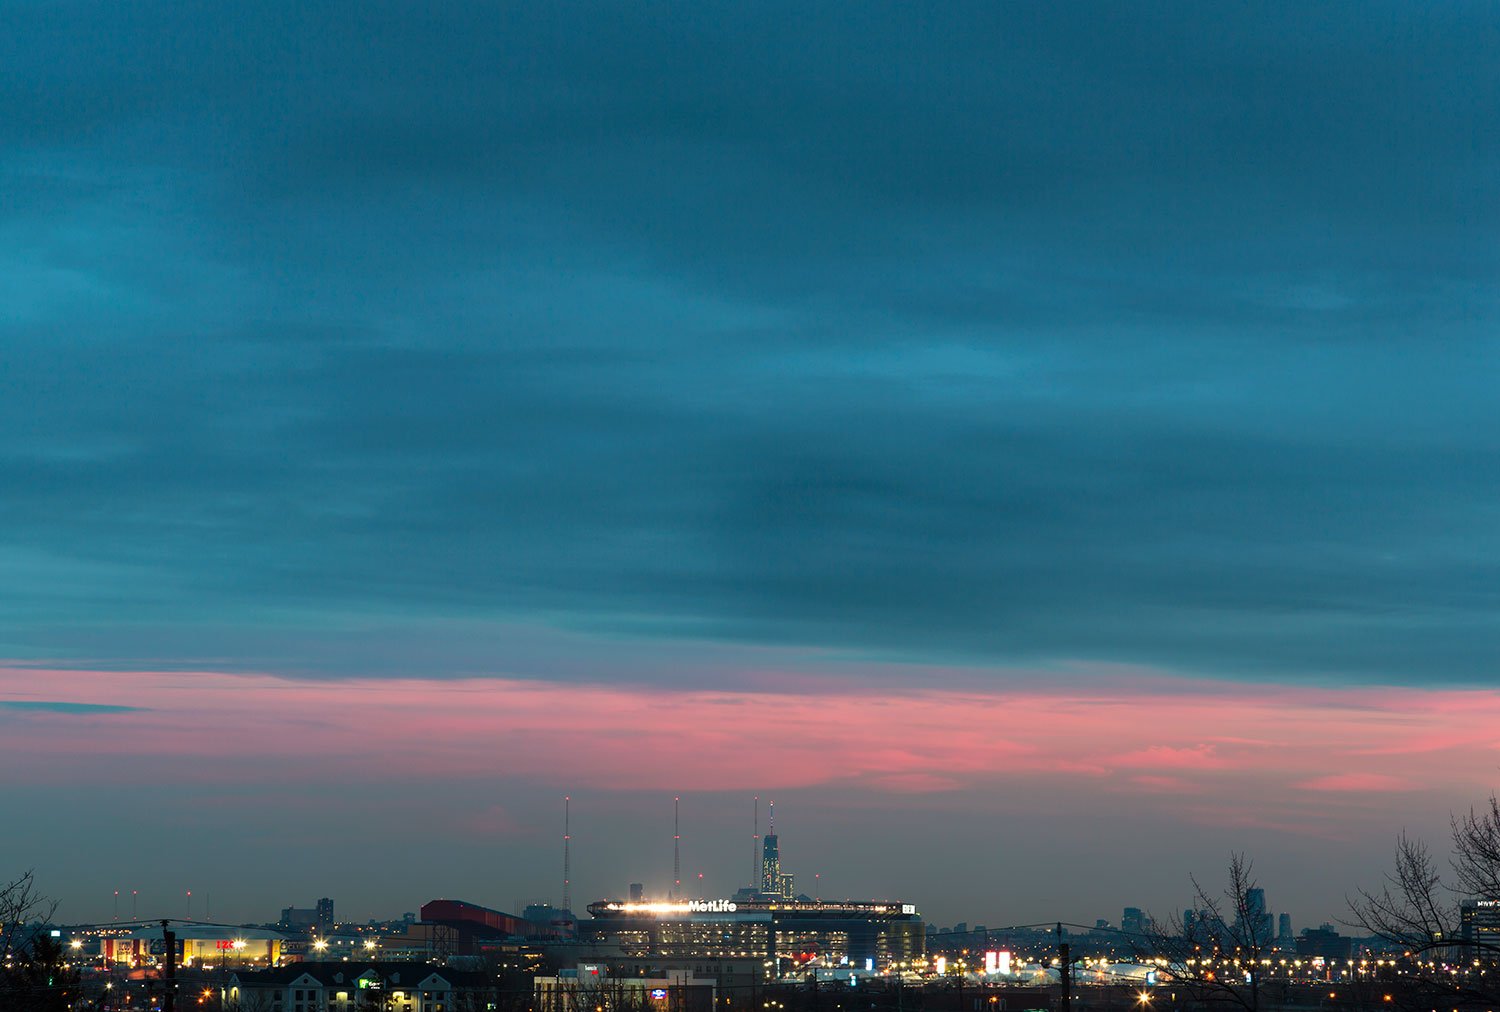   NFZ (East Rutherford, NJ, 2/2/14, 5:27 pm)  2014, archival pigment print 35 x 52.5 inches 